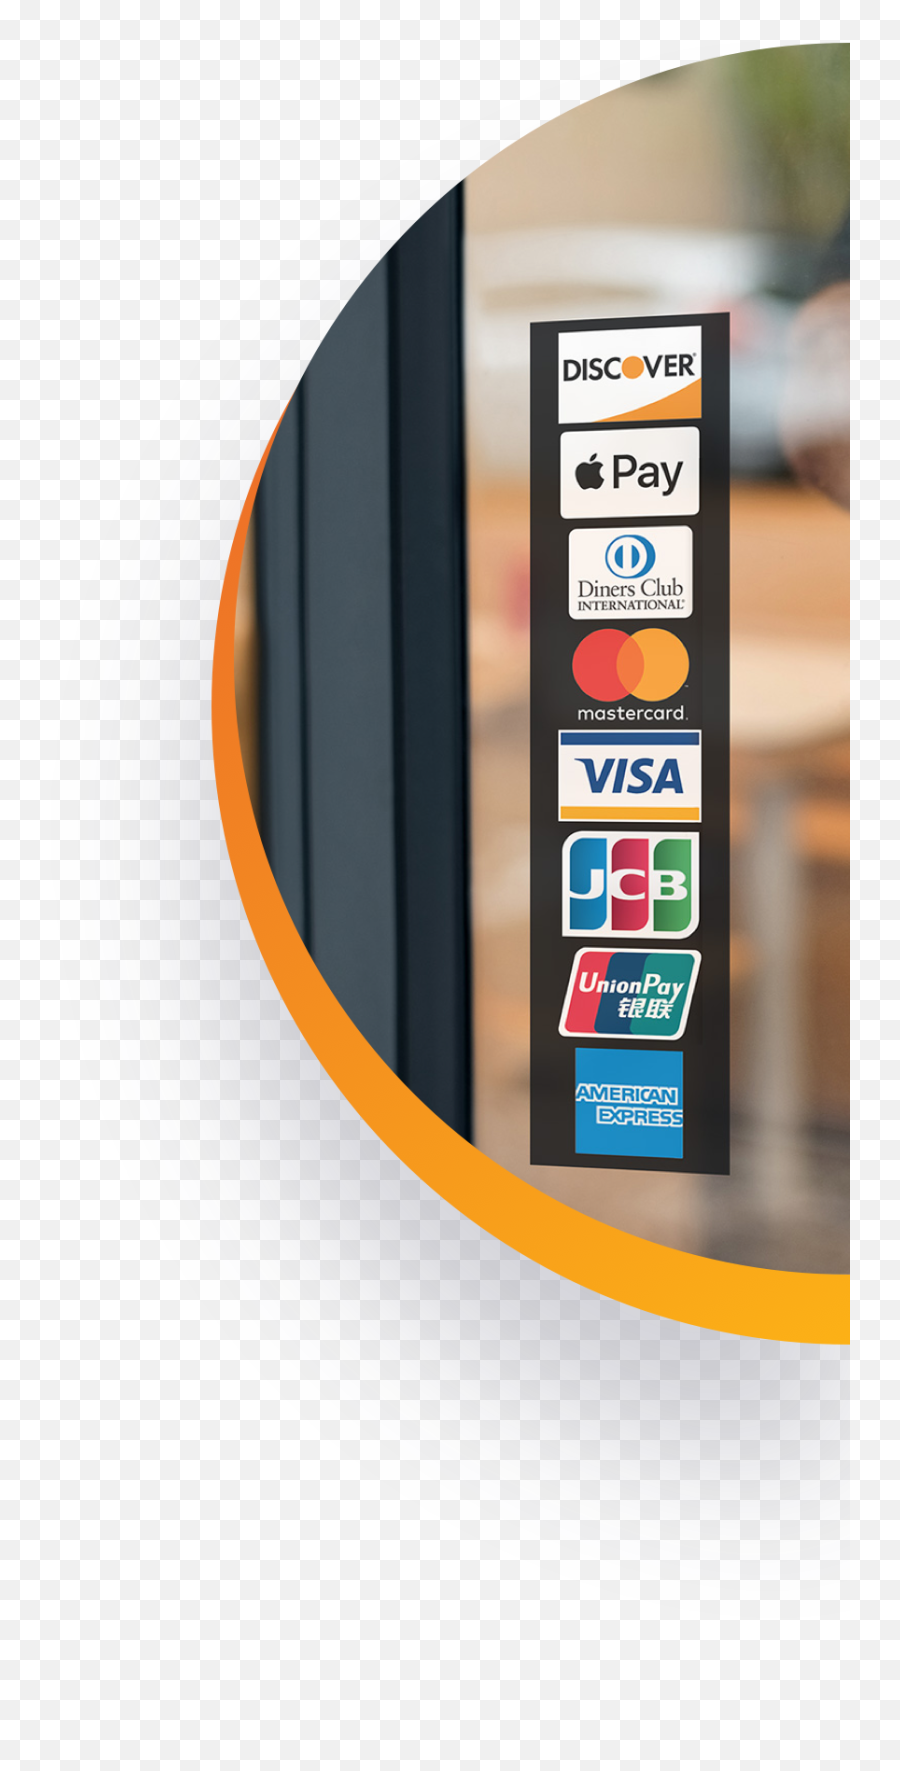 Get Free Signage And Logos Discover Global Network - Vertical Png,Discover Card Icon